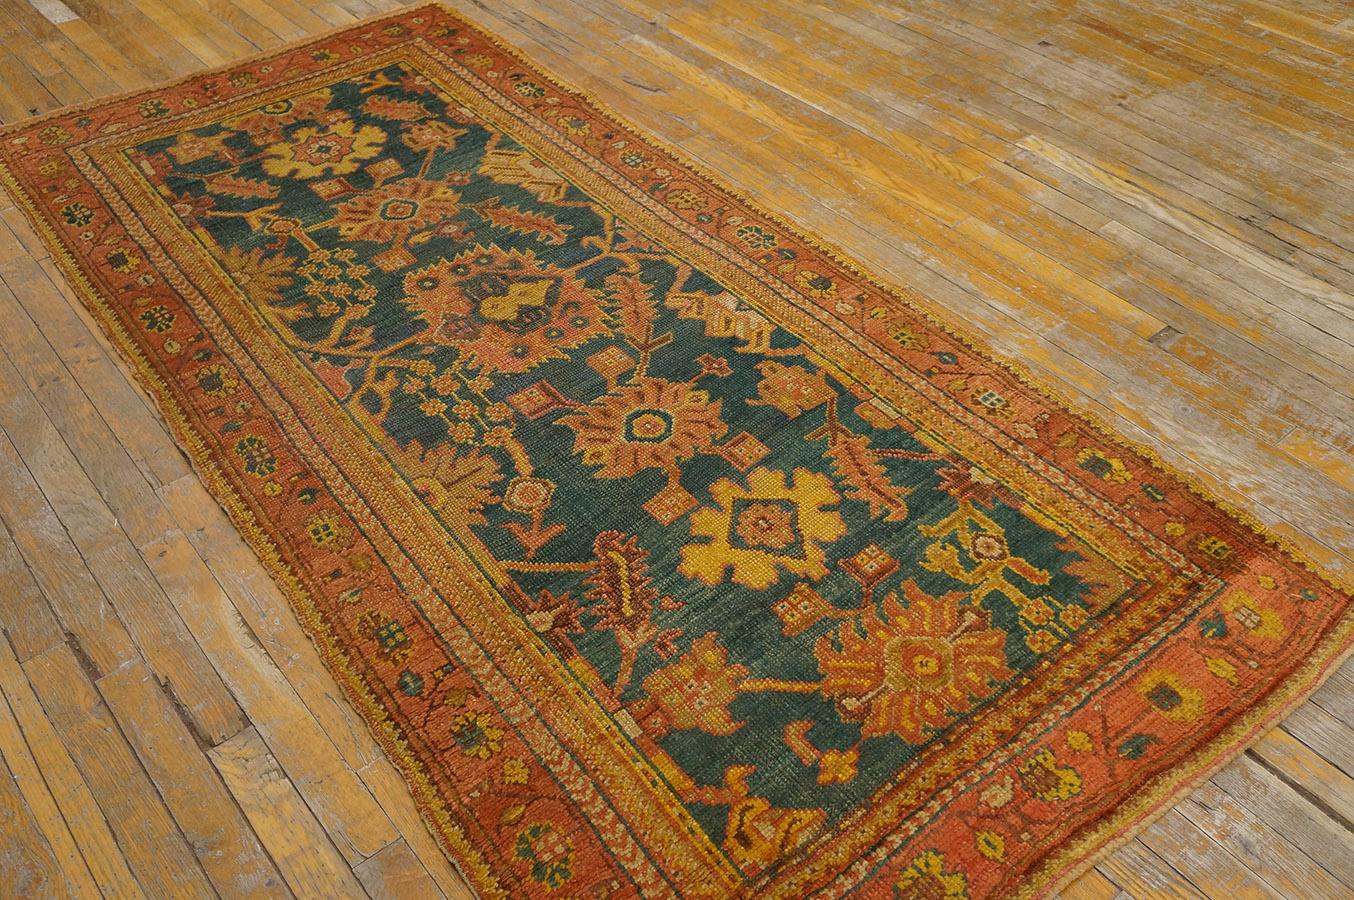 Not every Oushak is room sized. This snappy little rug with an imaginative segment of the harshang pattern on an attractively variegated sapphire blue ground is uncommon among these west Turkish weavings. The red main border has Persian roots in